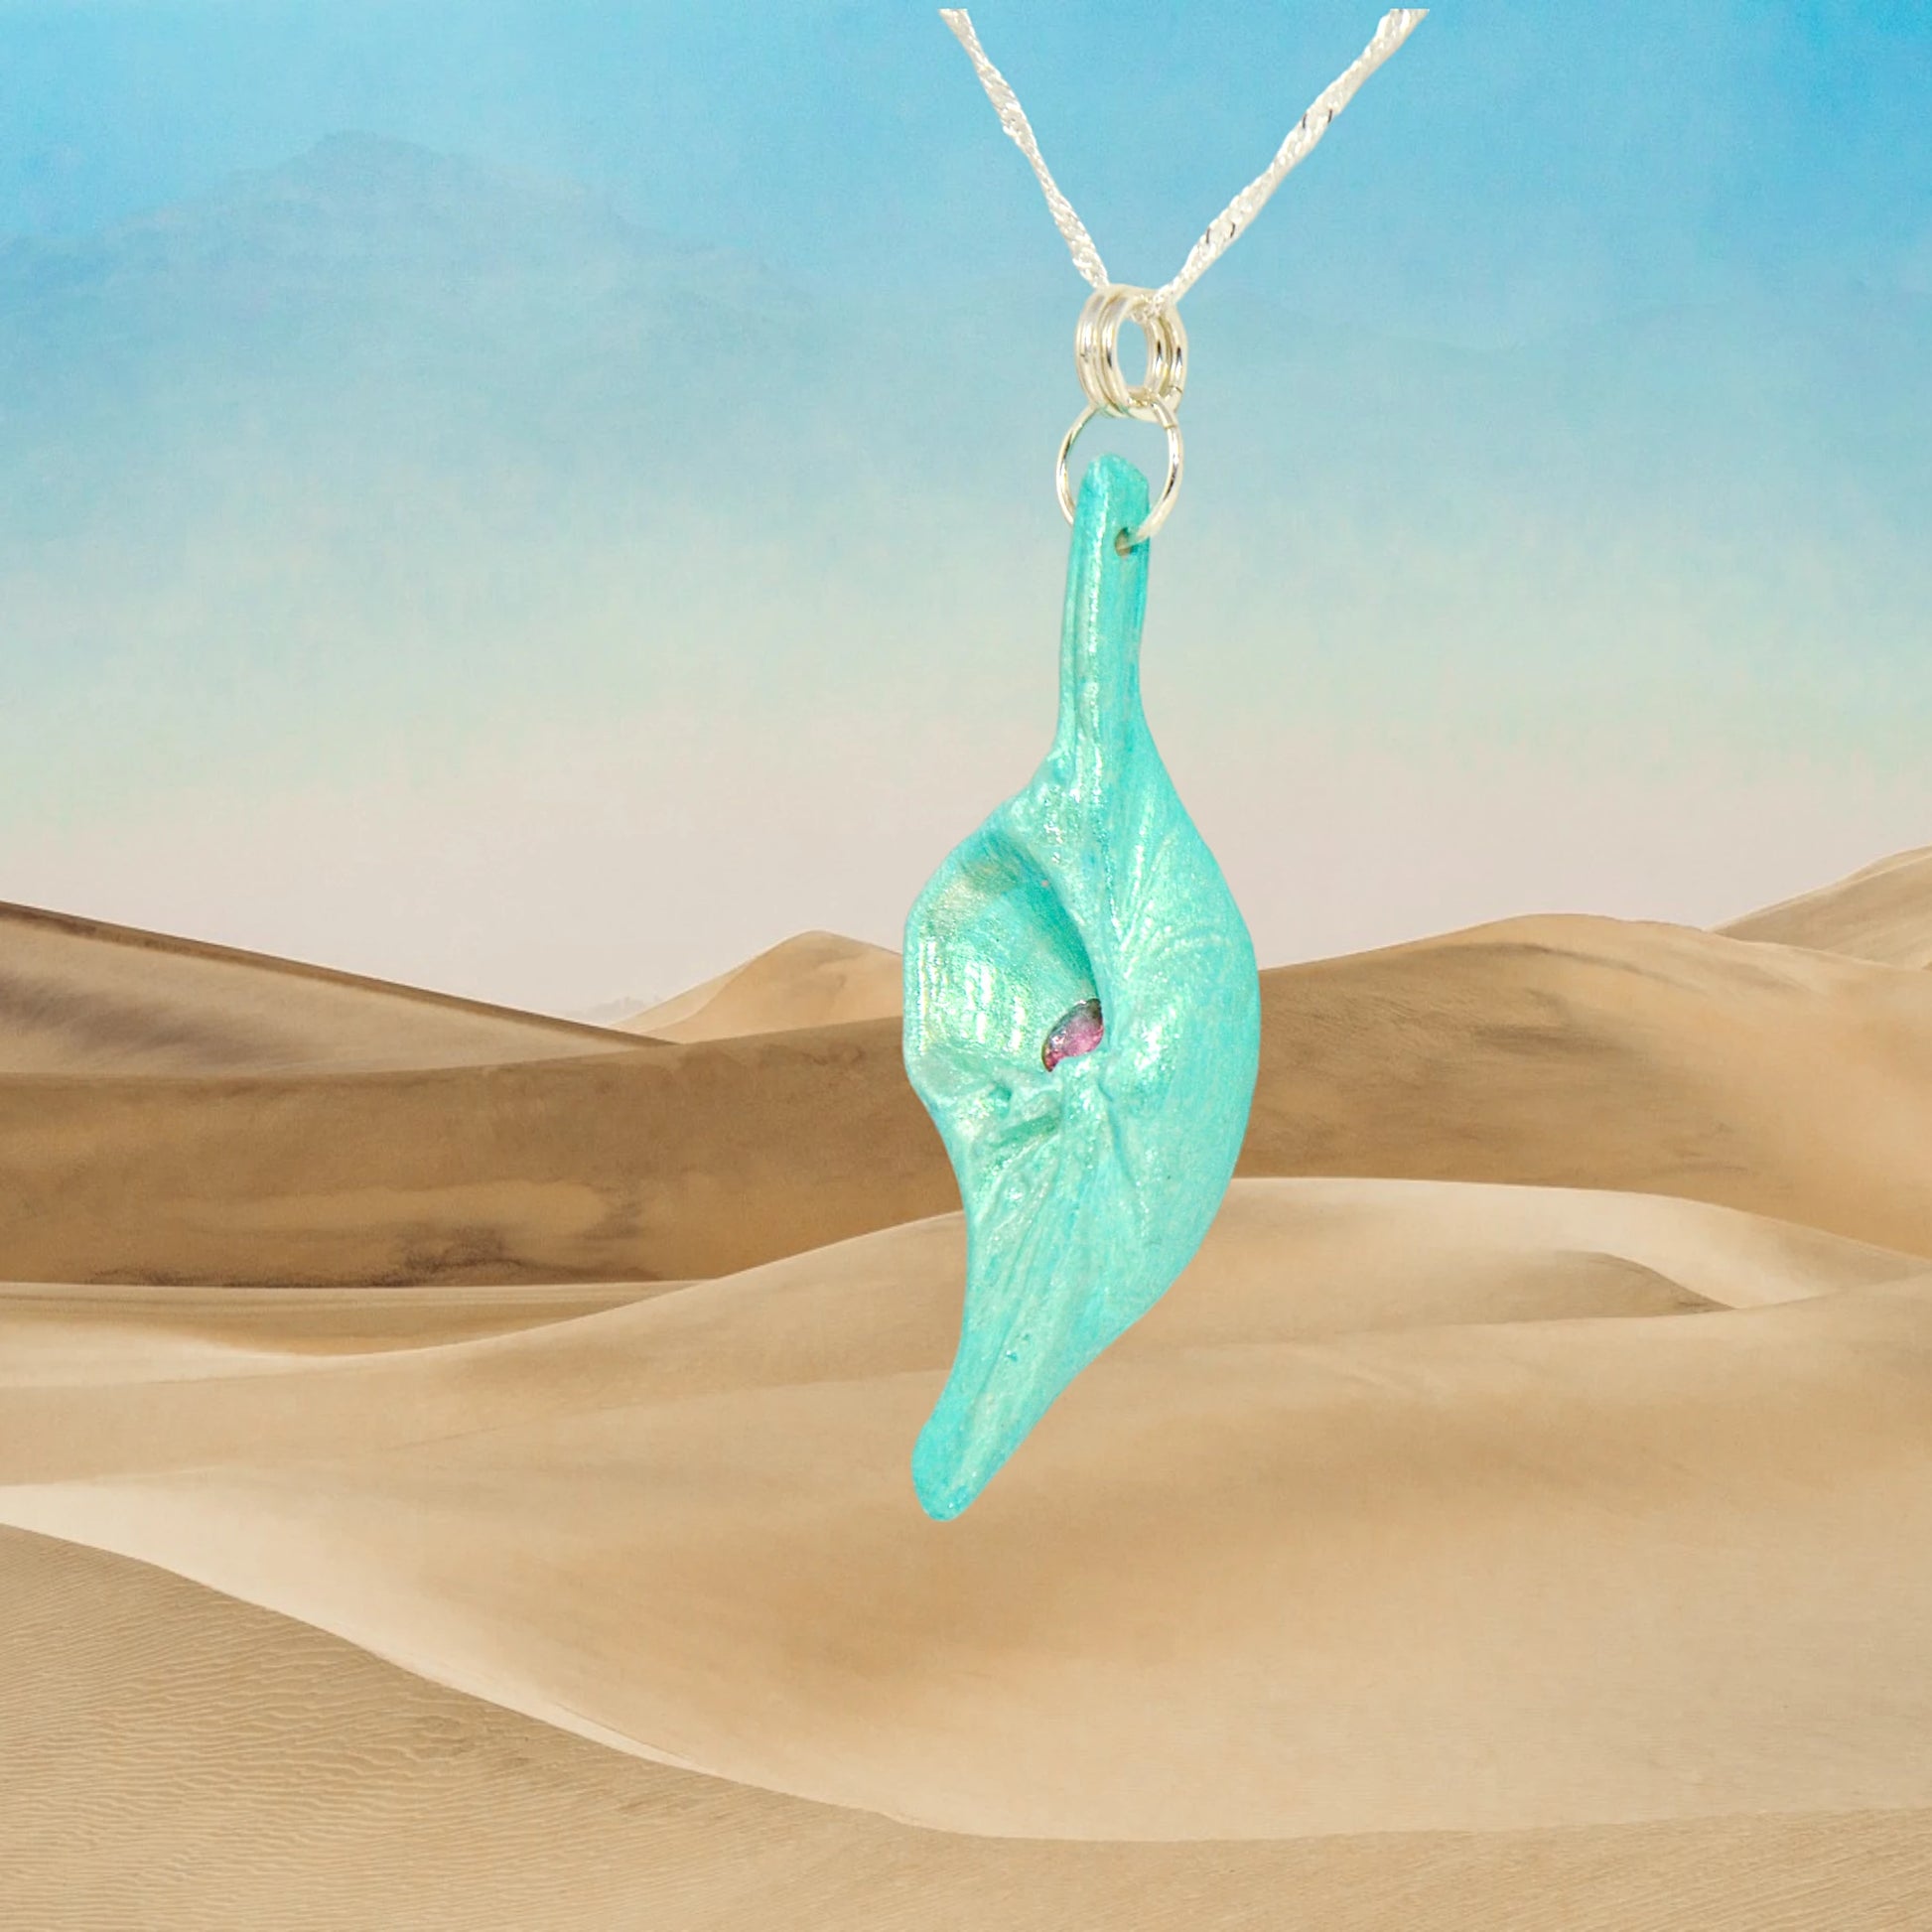 Rio is a natural seashell pendant with a faceted Pink Tourmaline gemstone.  The background is of sand dunes.